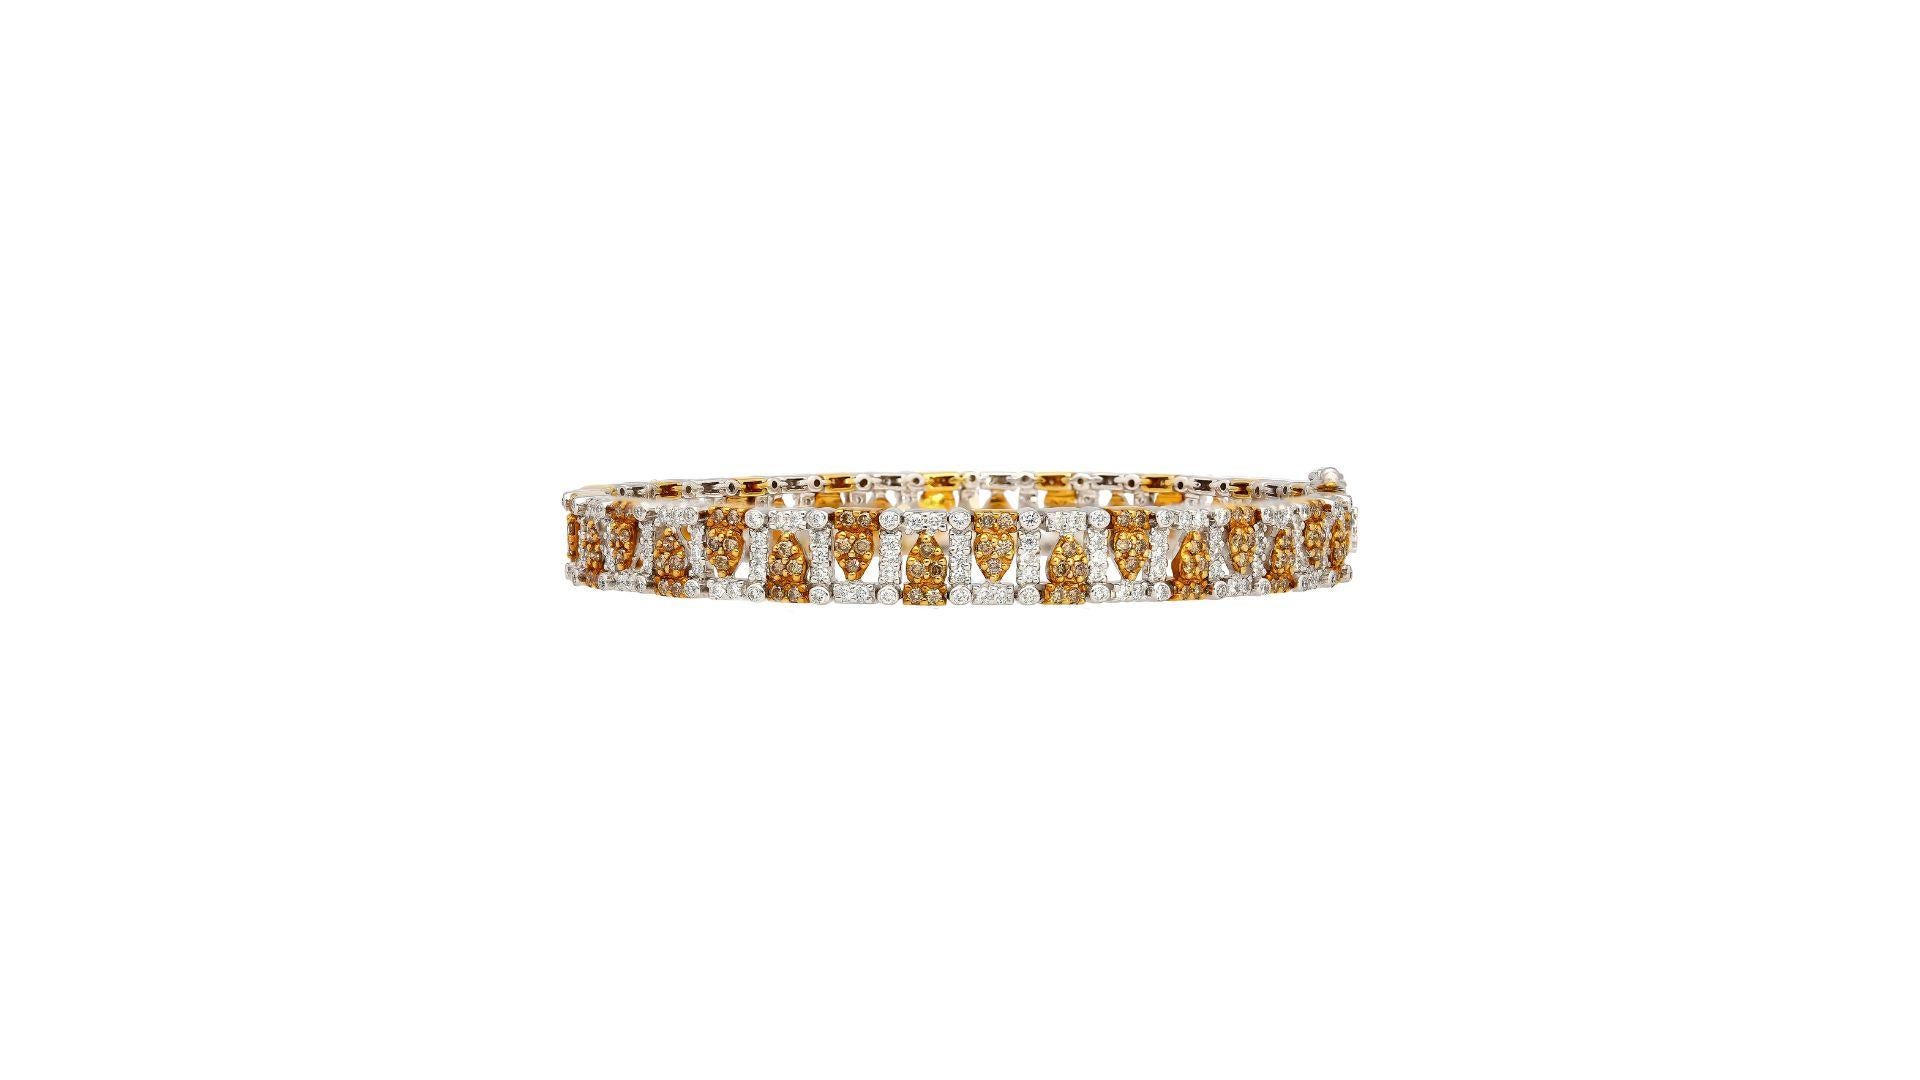 Art Nouveau 3.22 Carat TW Fancy Brown & White Diamonds in Patterned 18K White & Yellow Gold For Sale